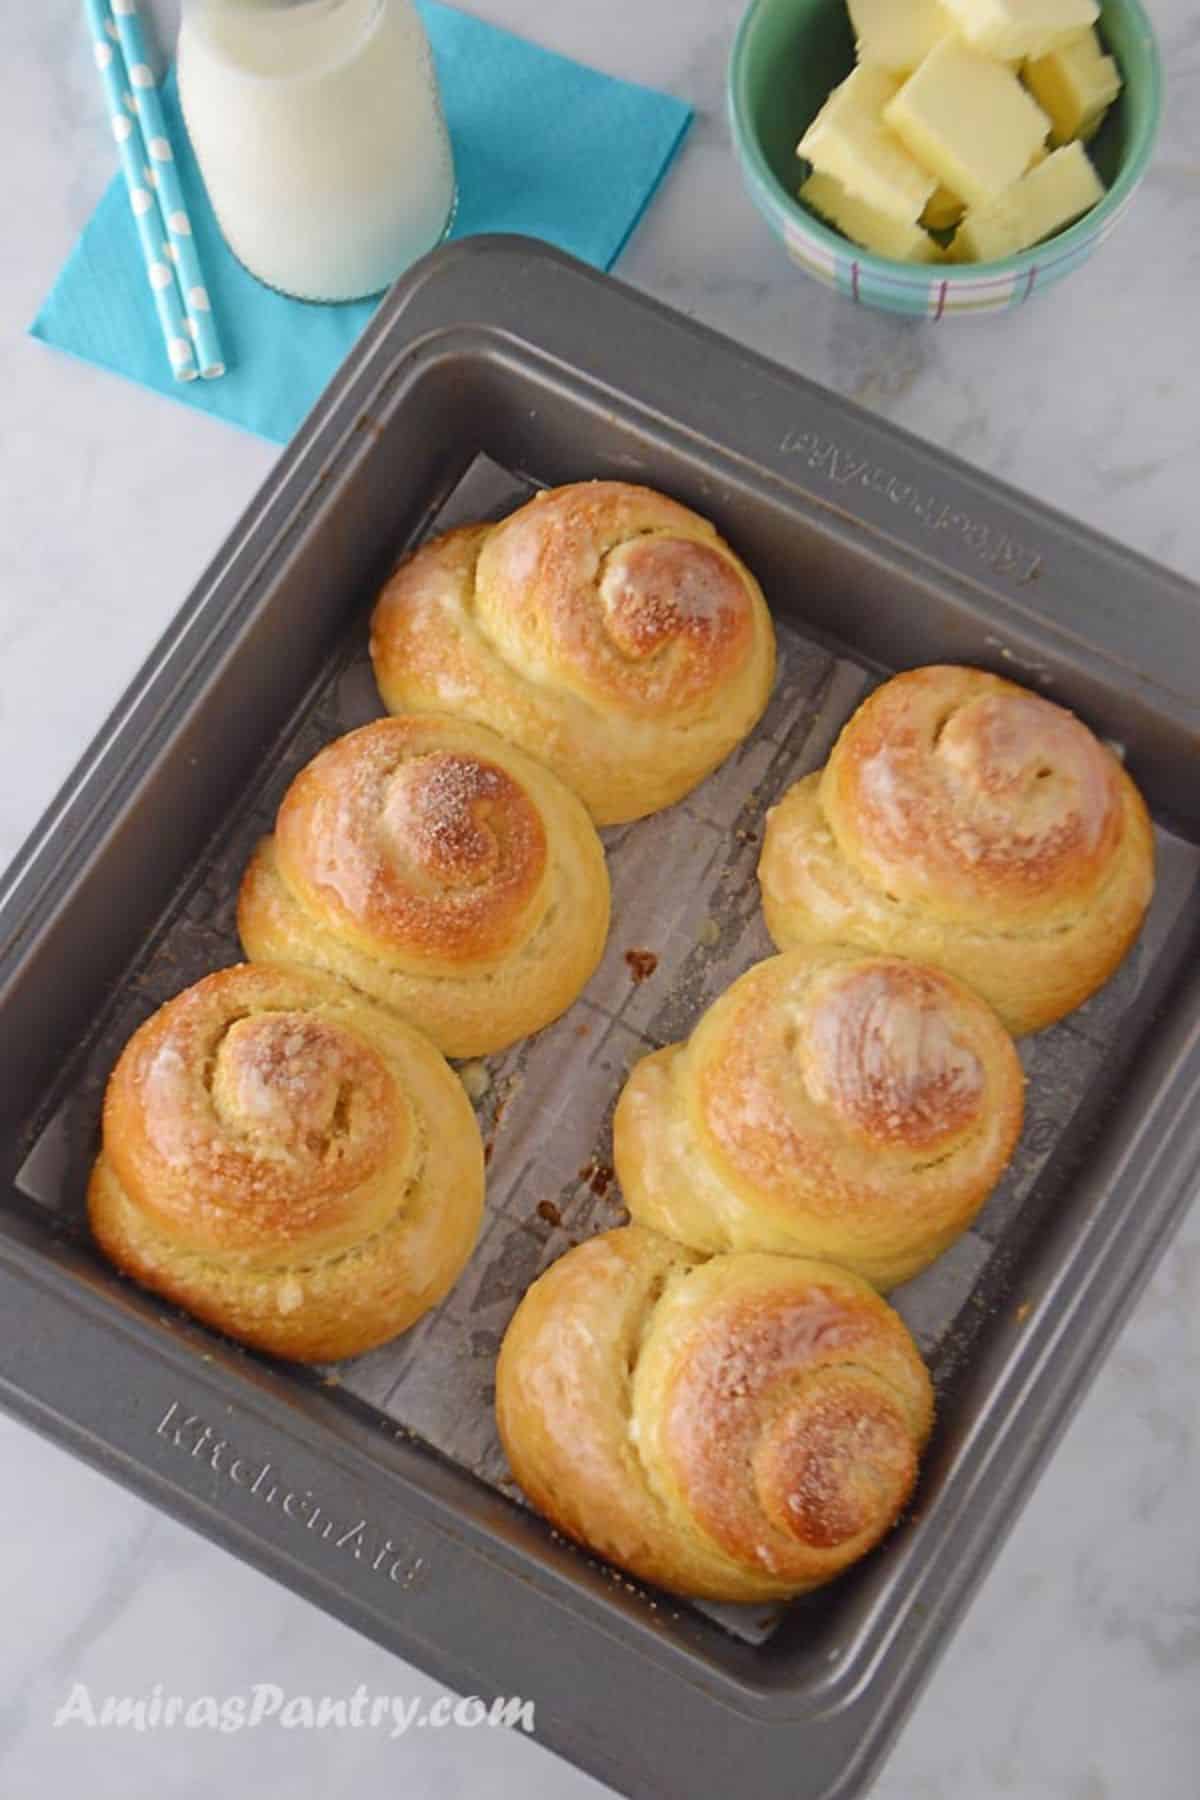 A top view of a baking sheet with 6 baked bread rolls.